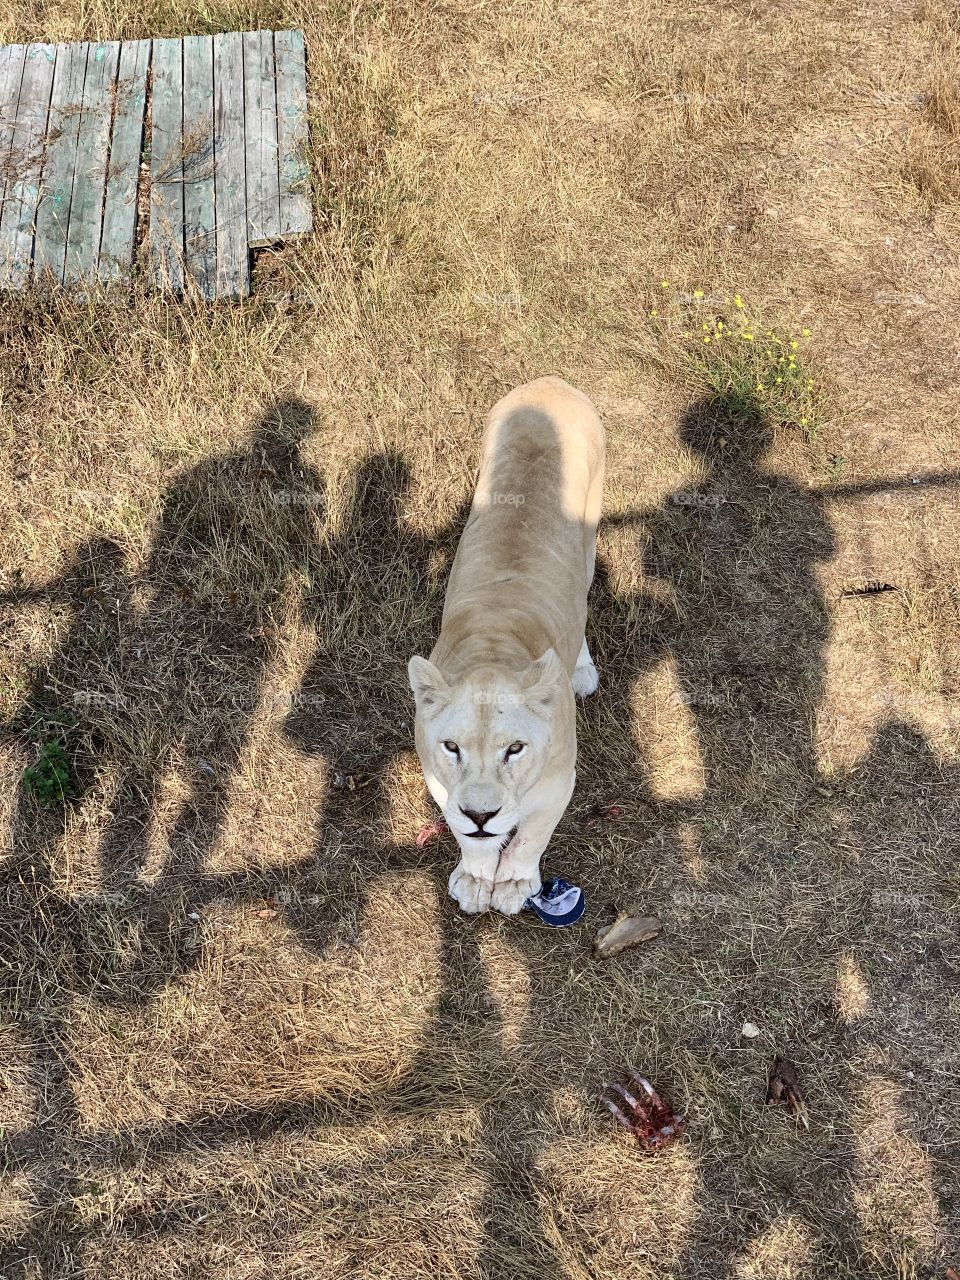 The young lioness was recently fed, and now looks at the visitors of the Safari Park. There are bones lying around.  Under the paws of the lioness - baby cap.  People visiting the Park are not visible, but their shadows are clearly visible